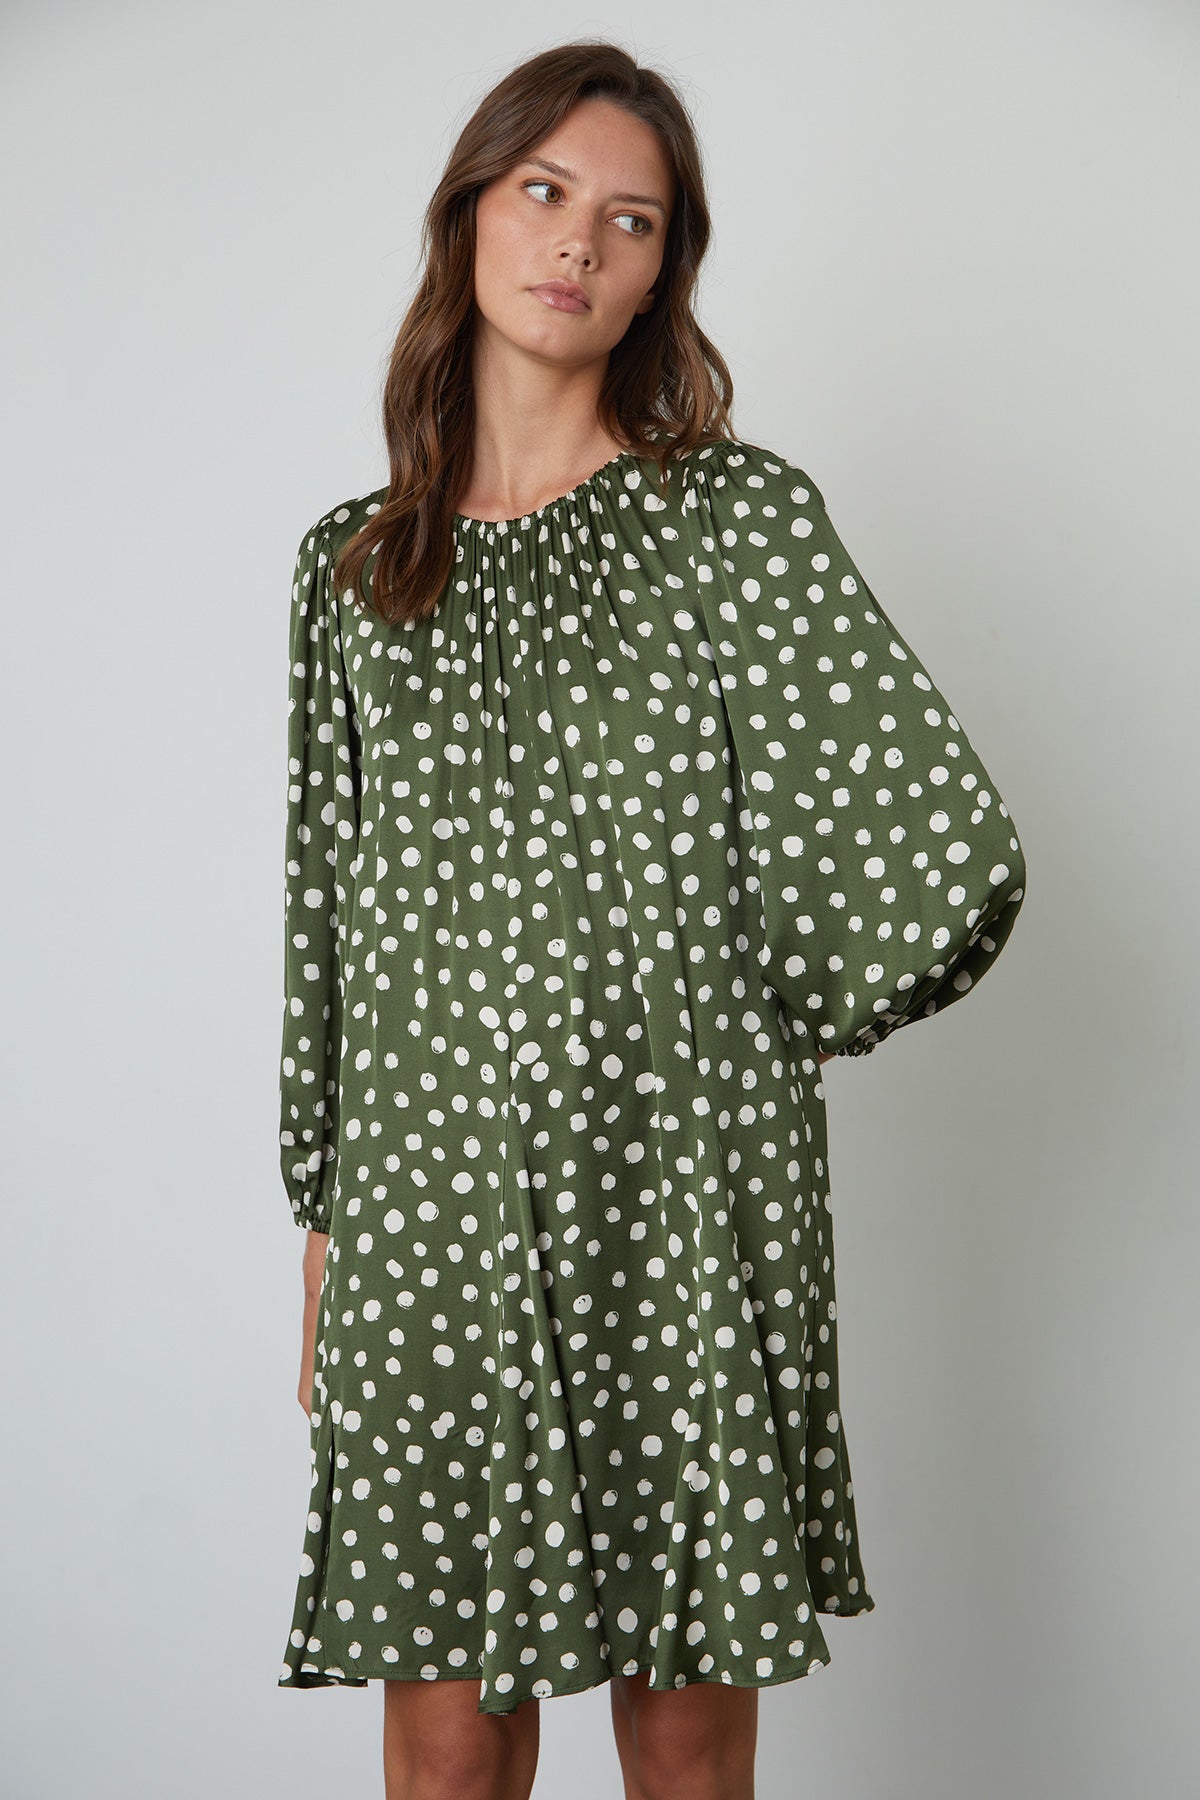   Kenia Polka Dot Dress with Green Background and Cream Dots Front 